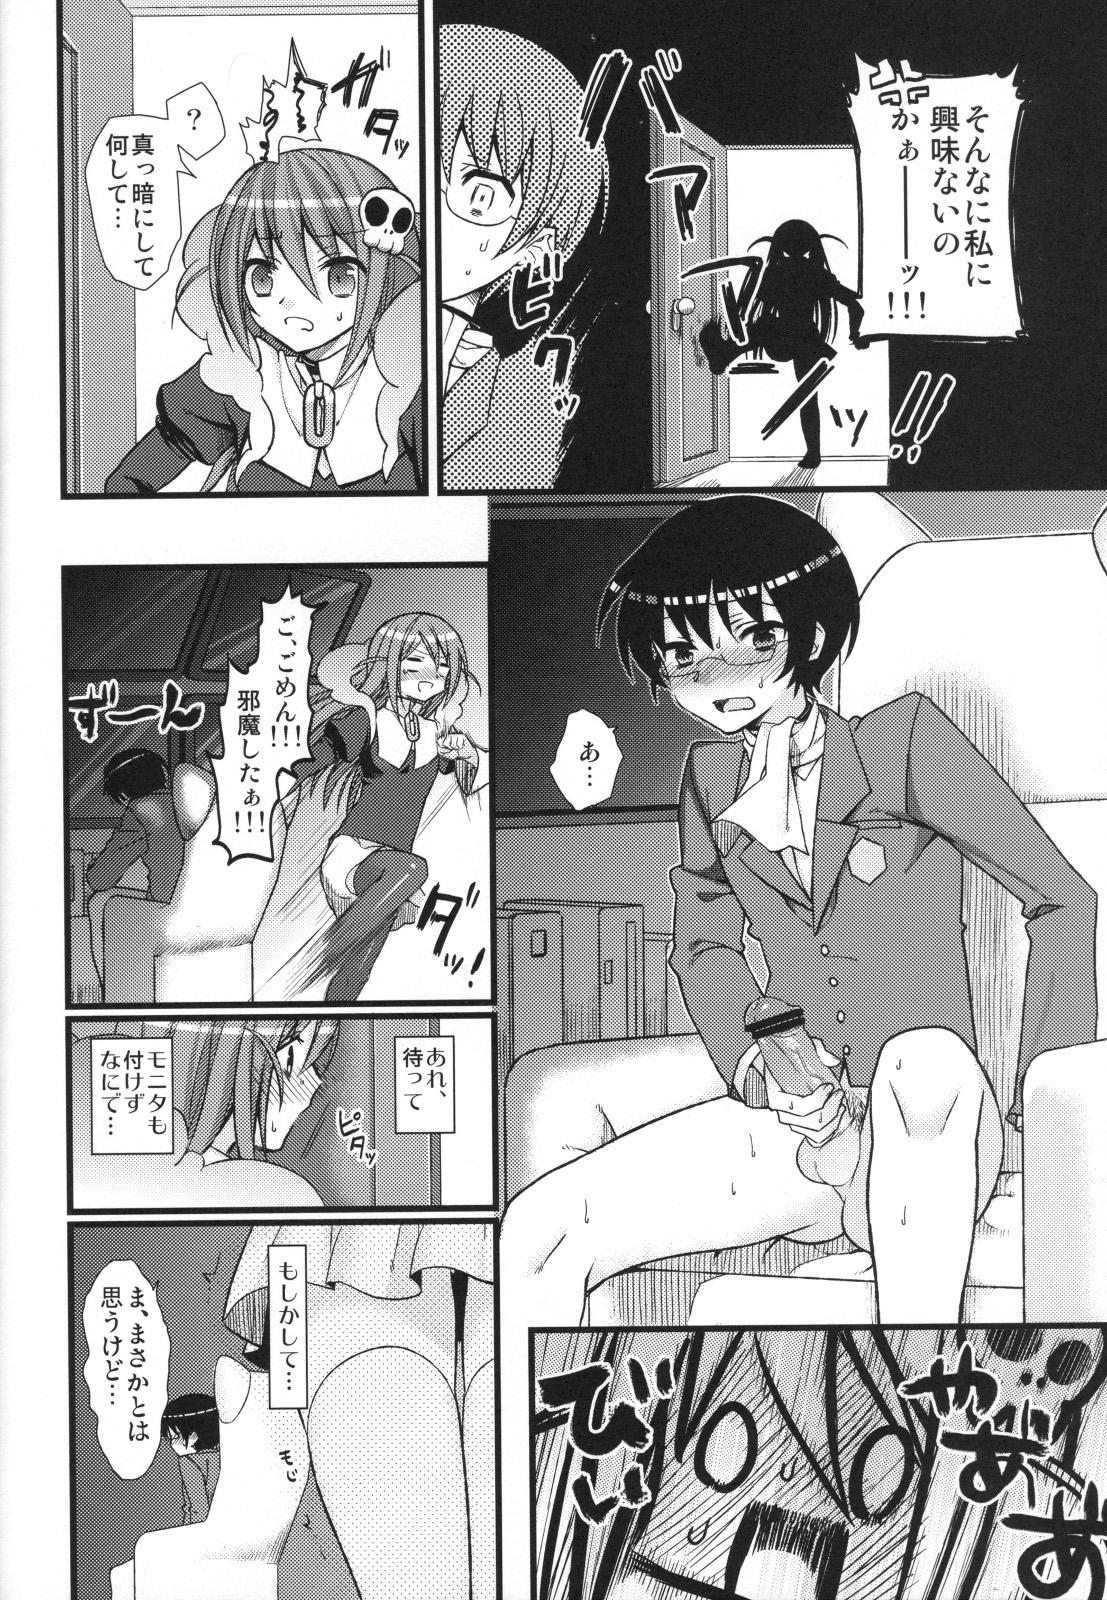 Hidden Camera EXP.04 - The world god only knows Hardcore Free Porn - Page 5